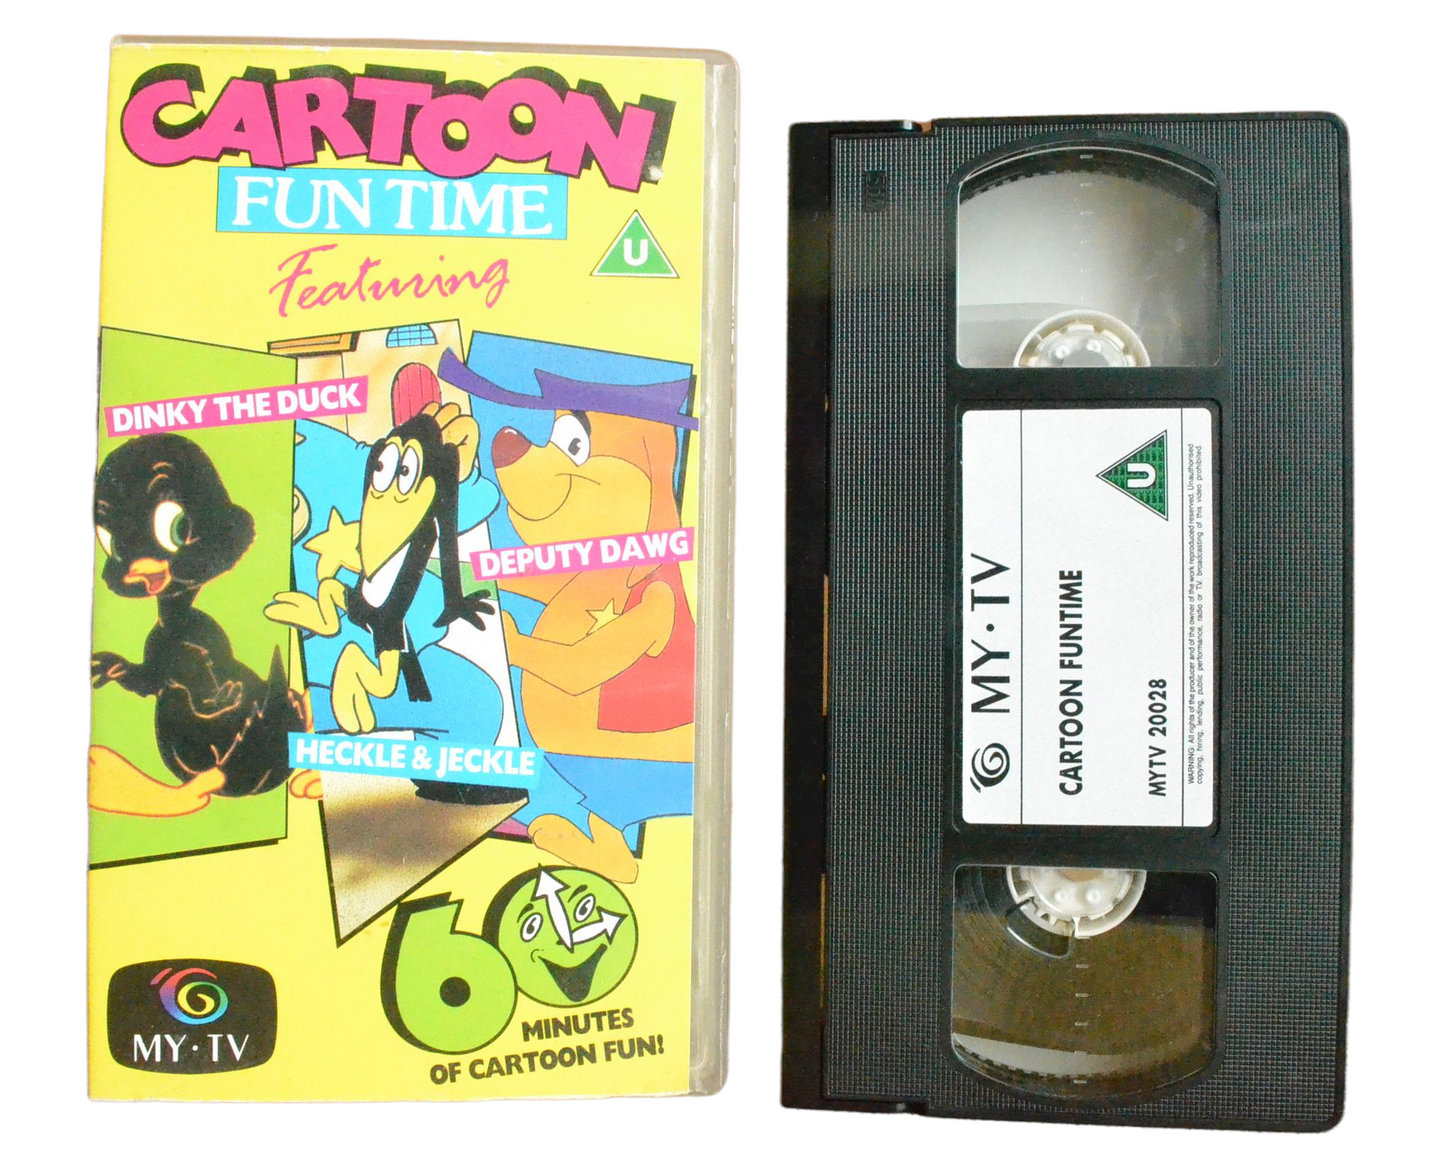 Cartoon Fun Time Featuring Dinky The Duck, Heckle & Jeckle, Deputy Dawg - MY TV - Children - Pal VHS-